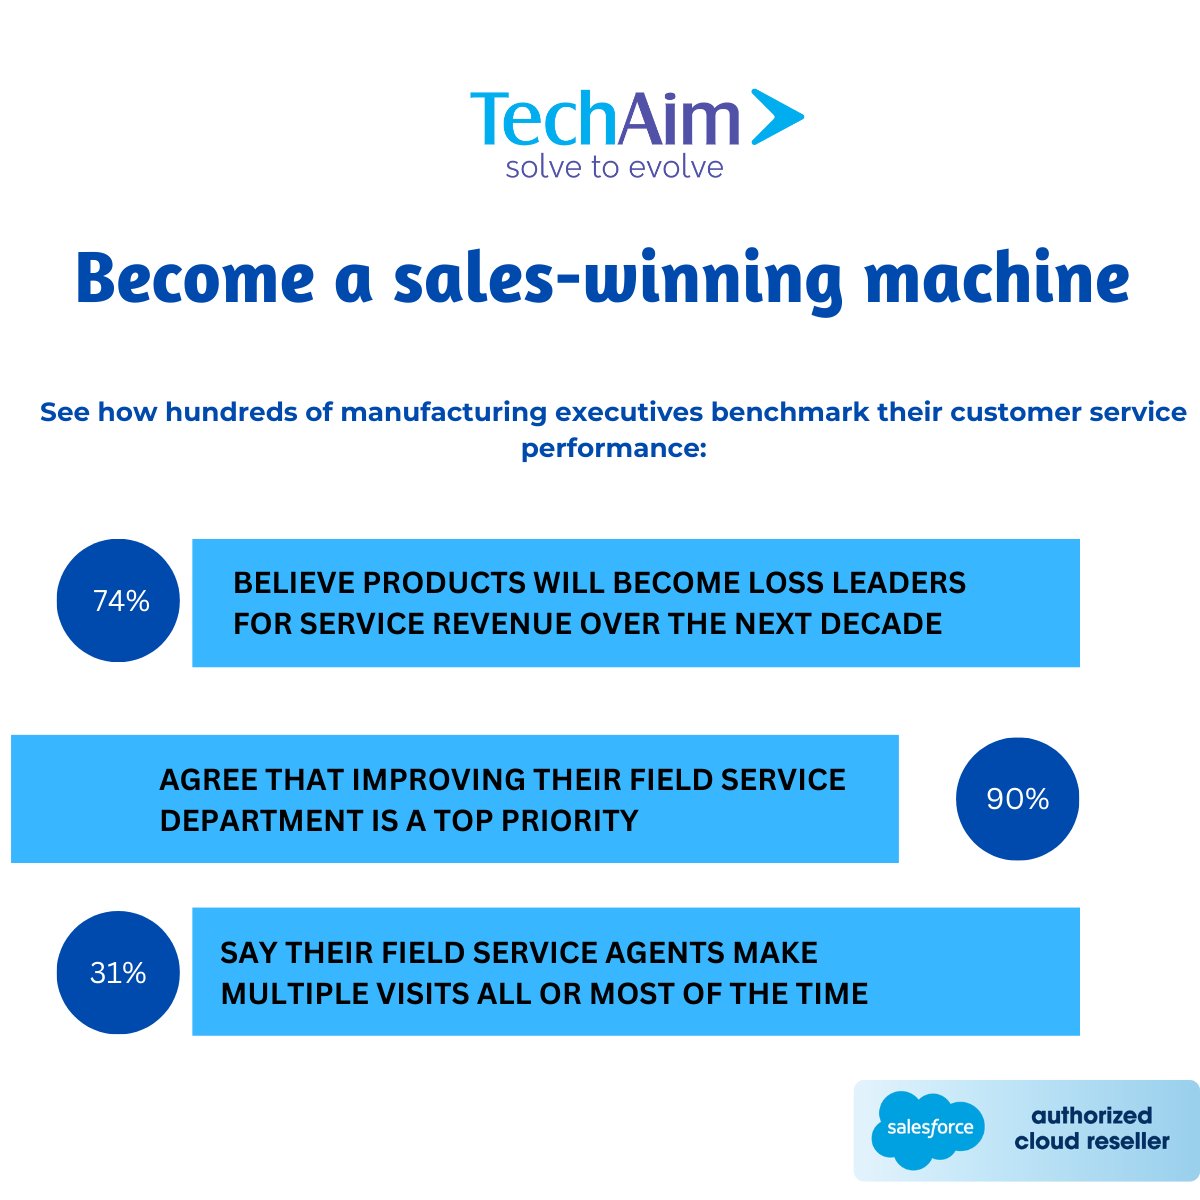 Discover all the ways that Salesforce CRM solutions optimised for Manufacturing can help your business succeed in today’s changing landscape with TechAim- an authorised salesforce reseller.

#salesforce #teachaim #manufacturing #industrygrowth